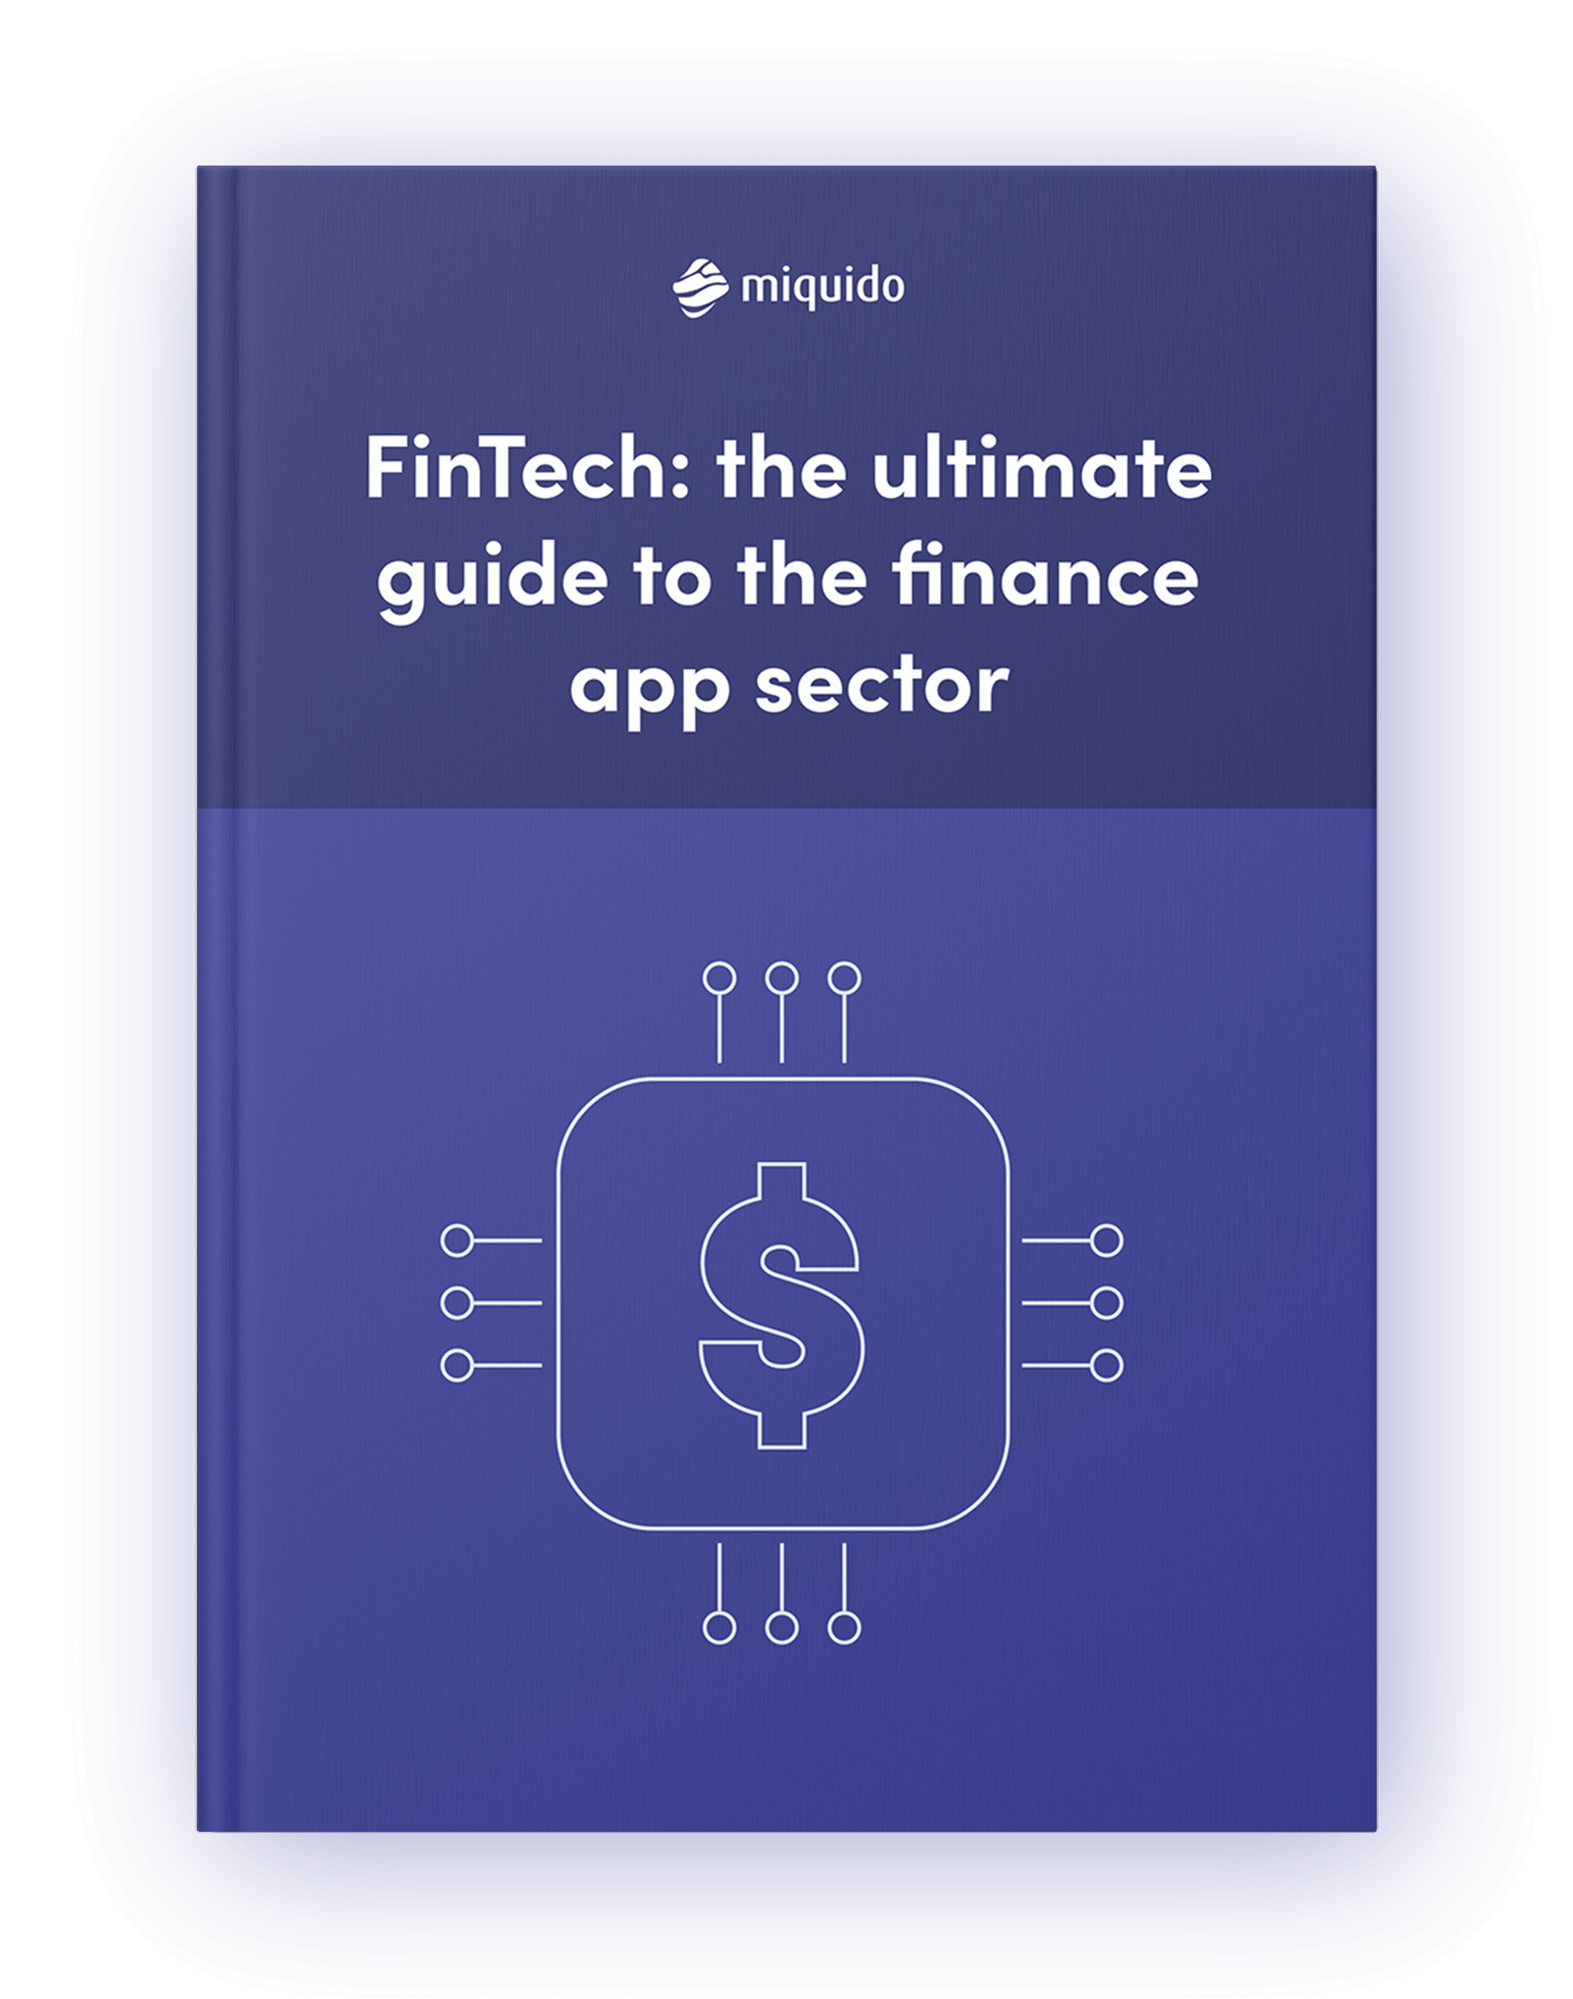 FinTech – the ultimate guide to the finance app sector – Shadow book cover mockup (1)